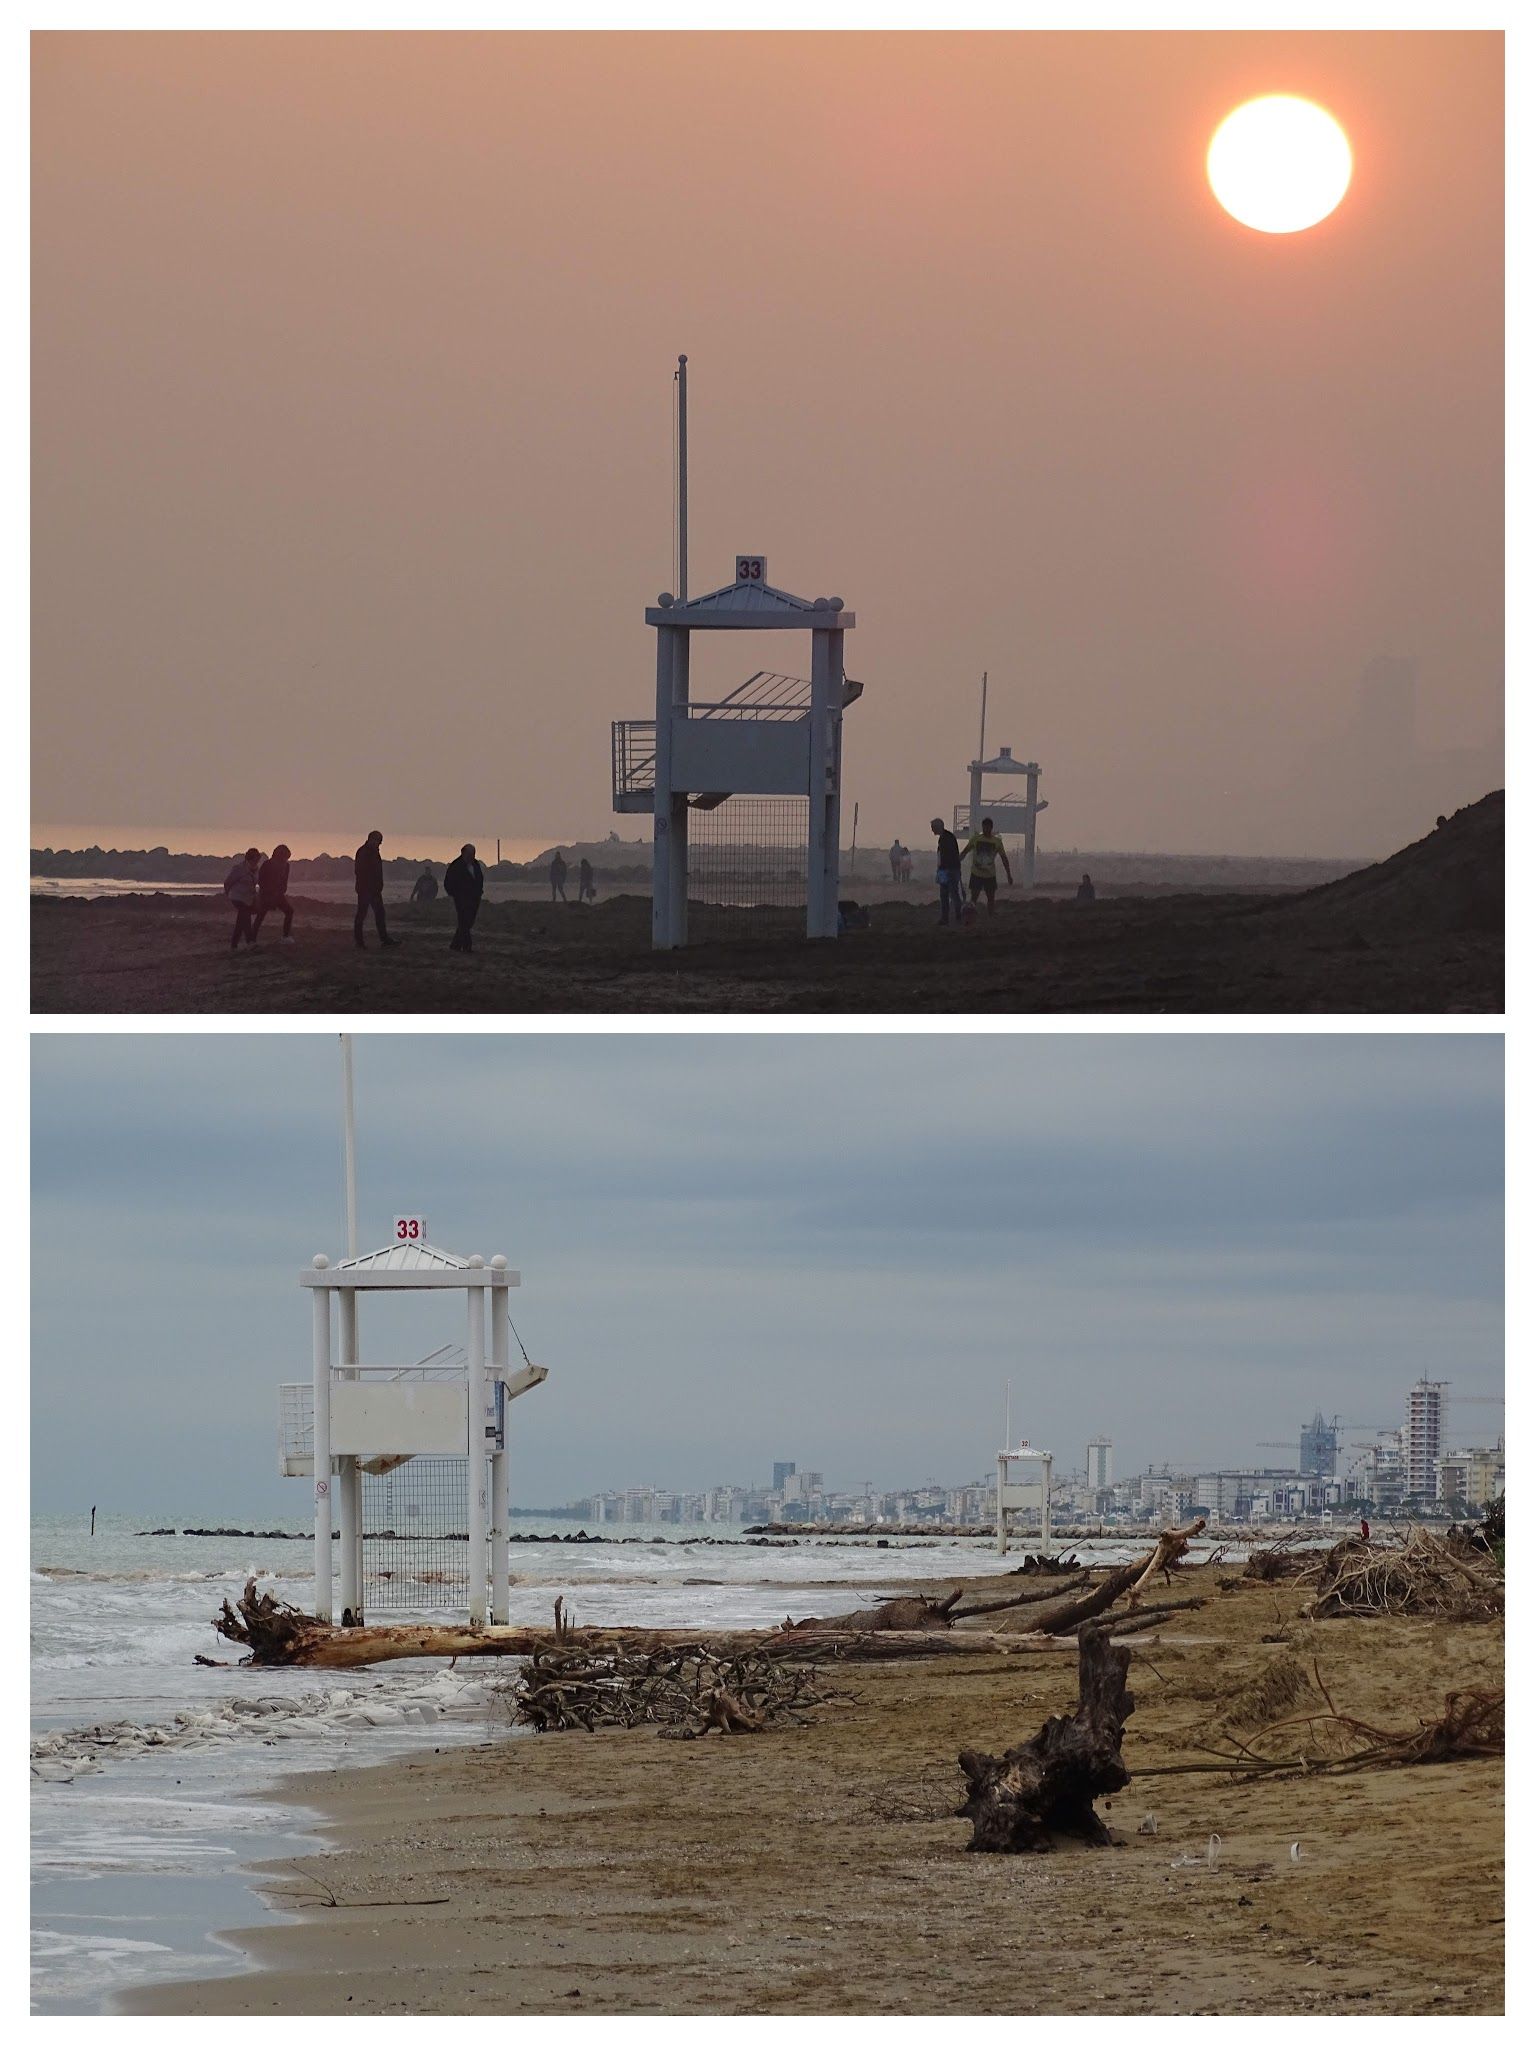 Caption: two view of the same beach: on the top, the beach on October 27th. On the bottom, the same beach on December 1st - Photo Credit: Local Guide @ermest